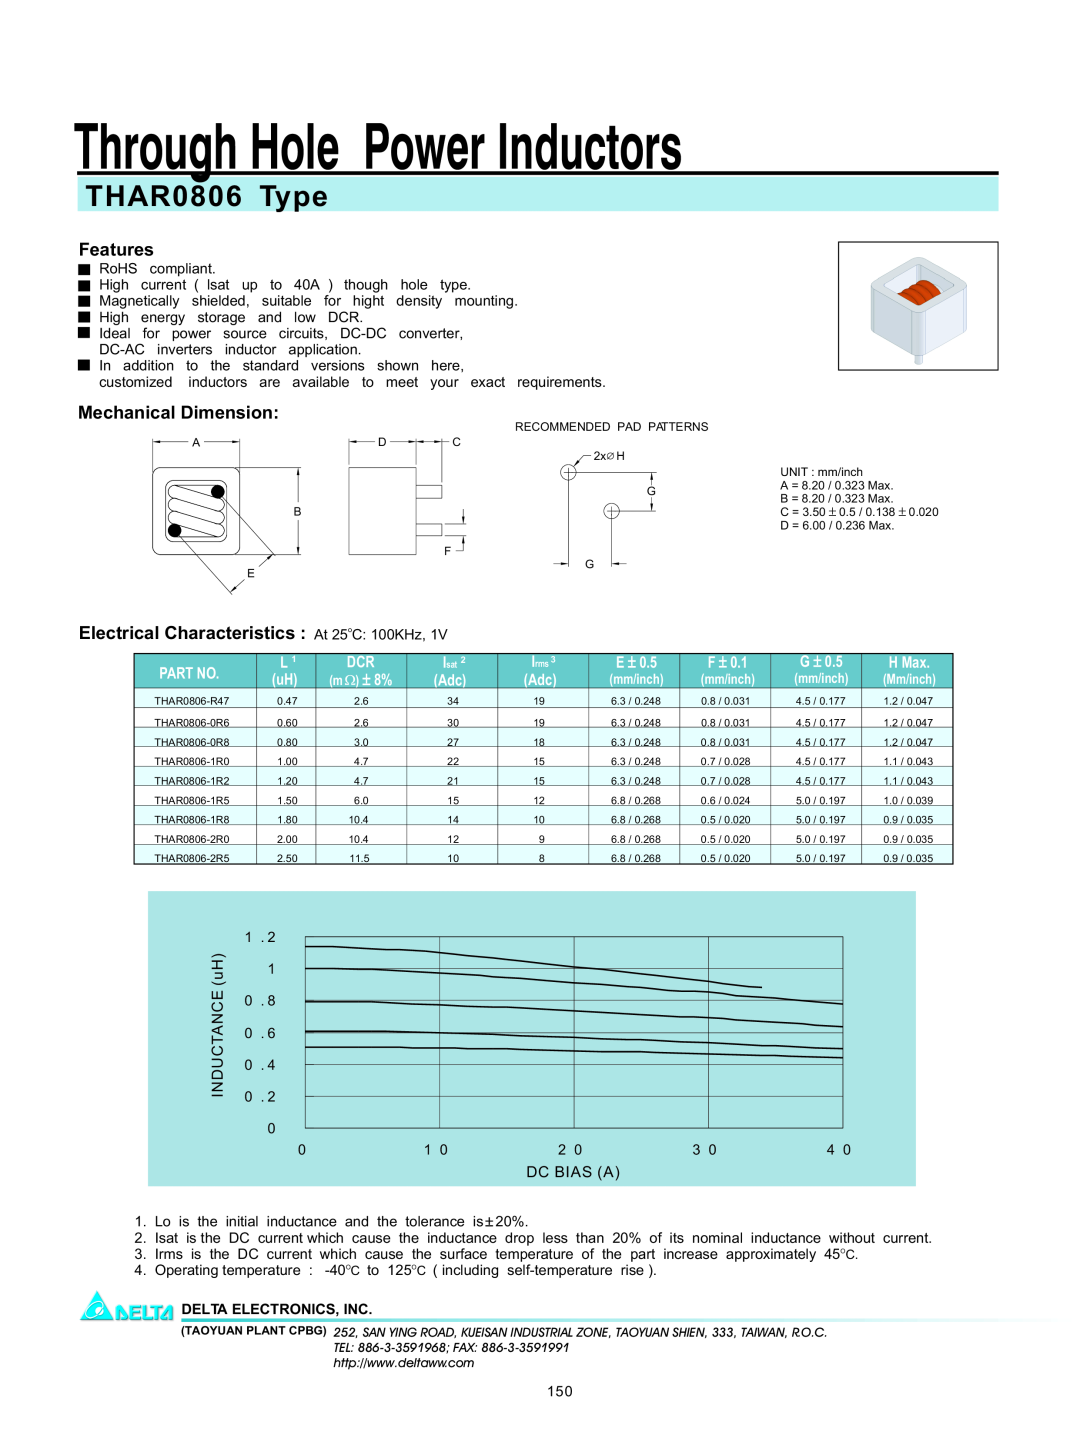 Delta Electronics manual Through Hole Power Inductors, THAR0806 Type, Features, Mechanical Dimension, H Max 